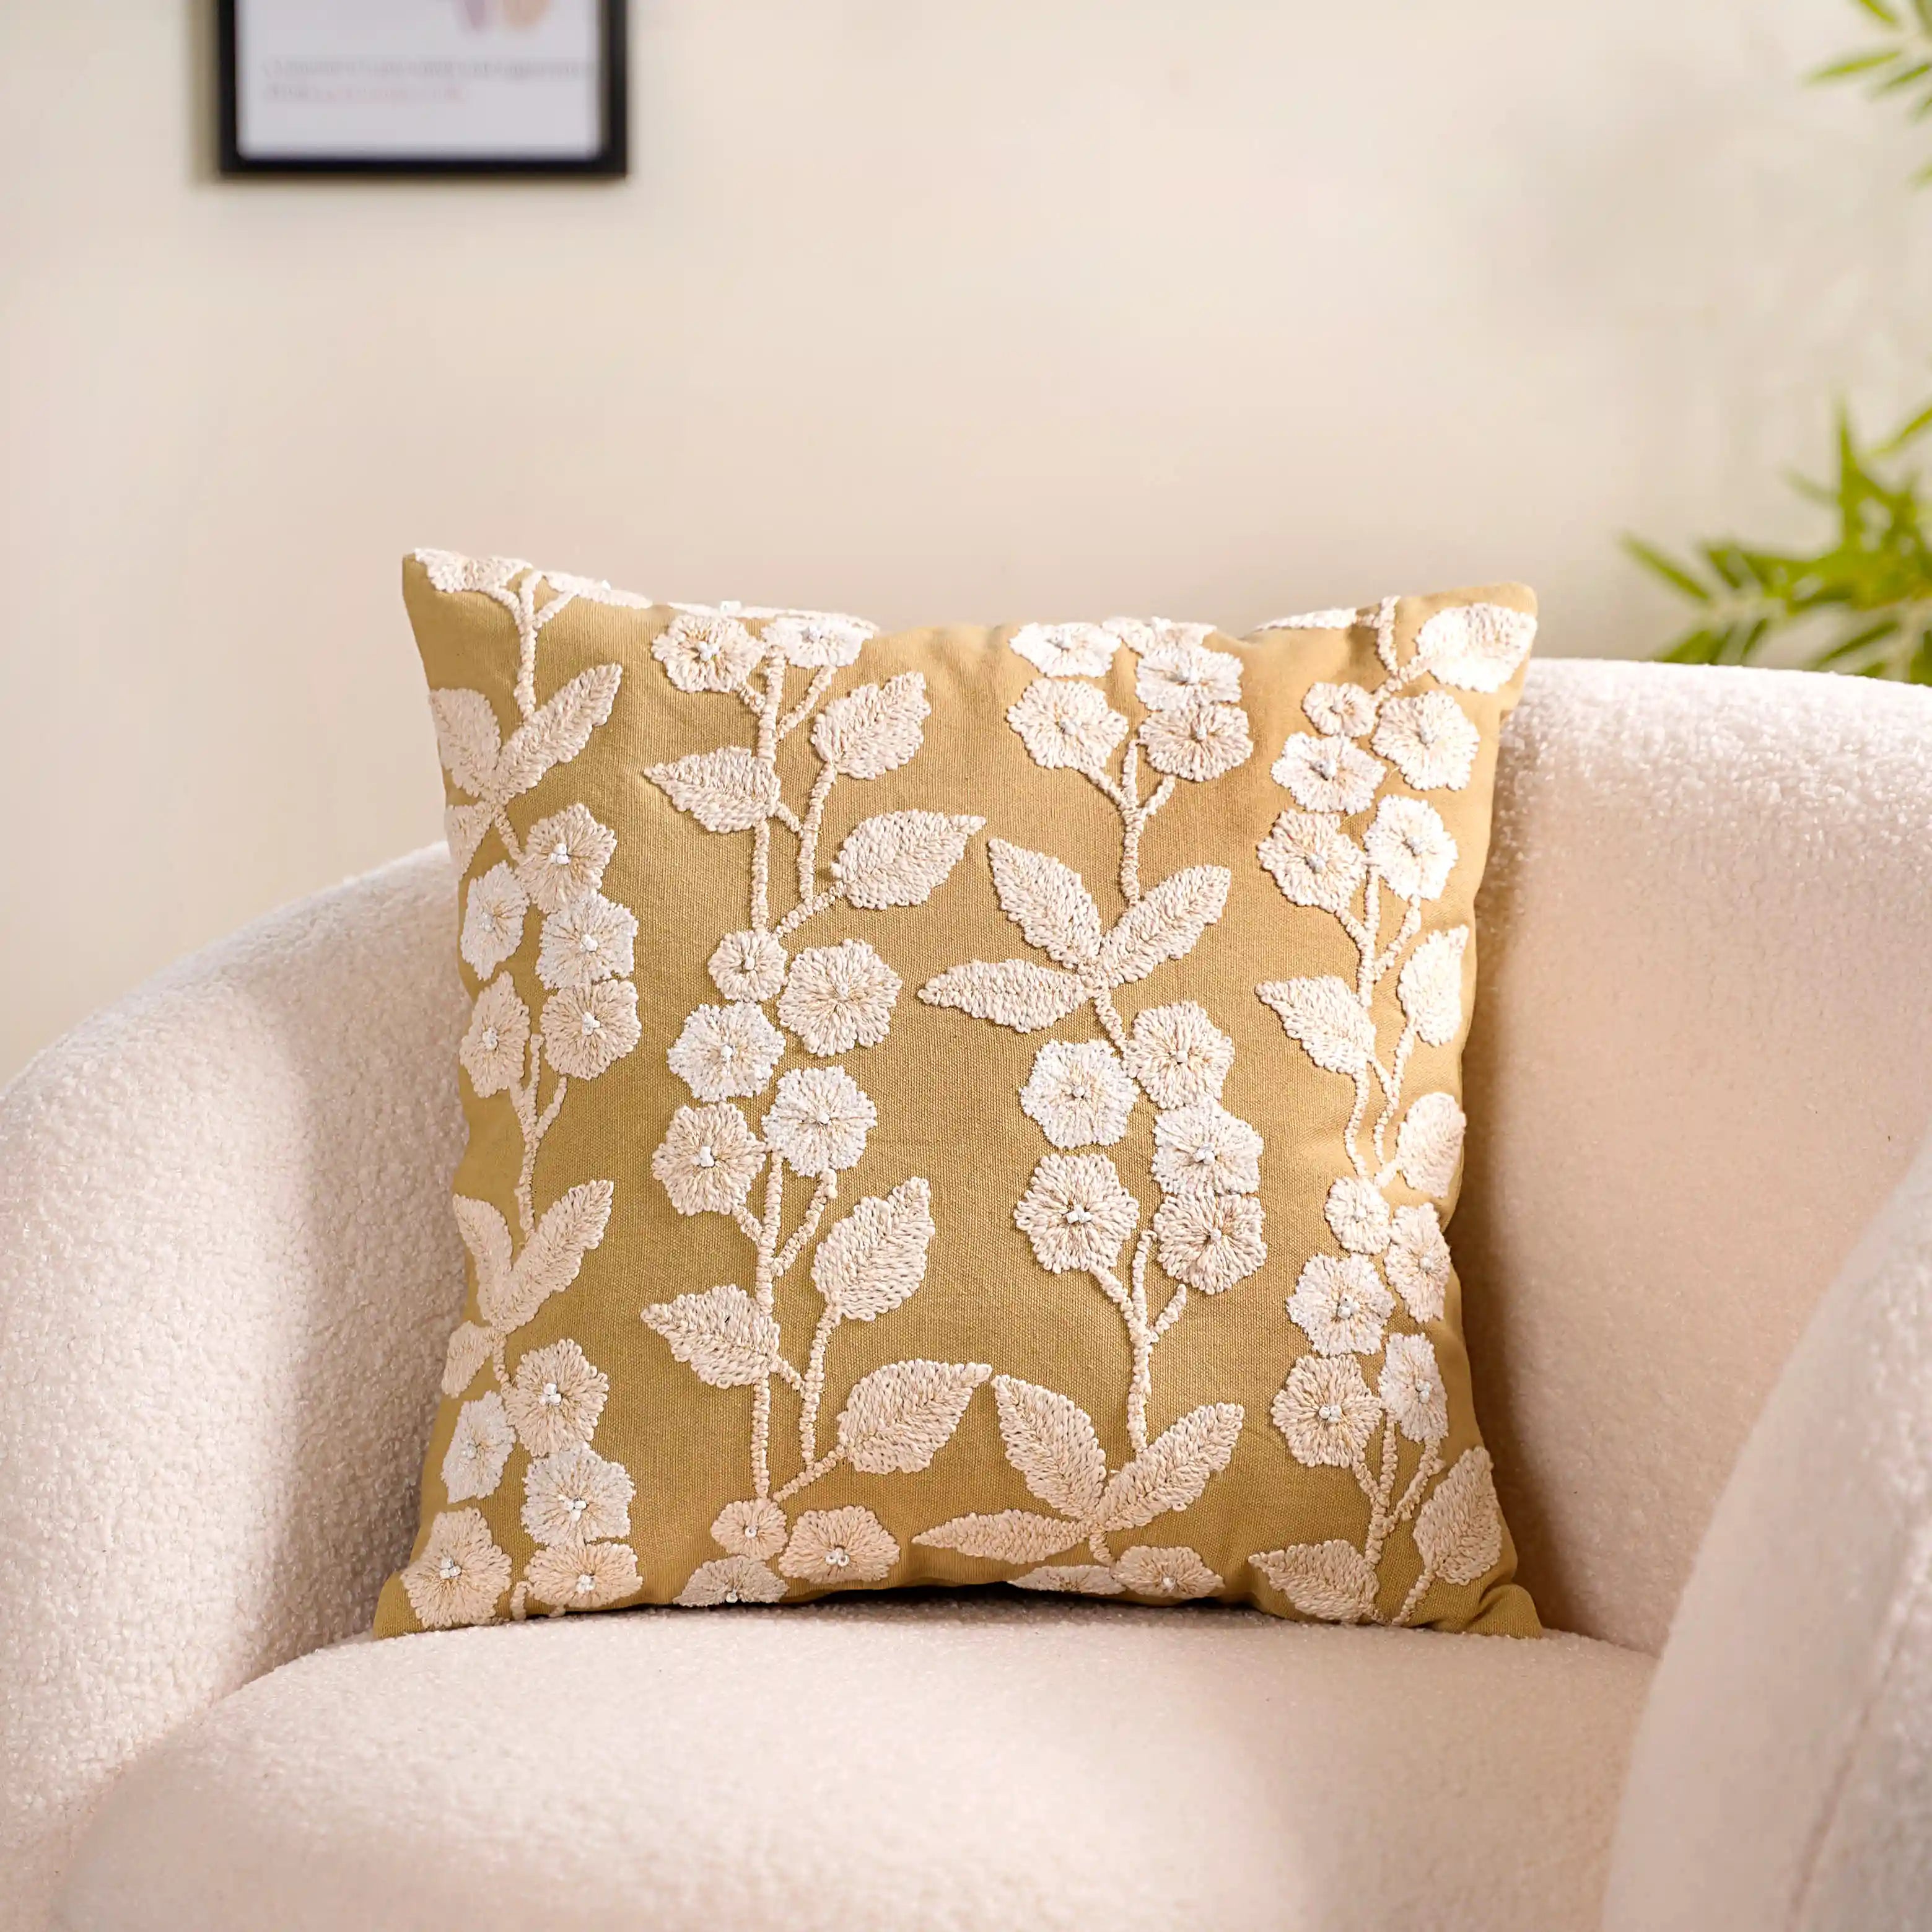 Bright Floral Pillow Covers for Cottagecore Room Decor Shabby 